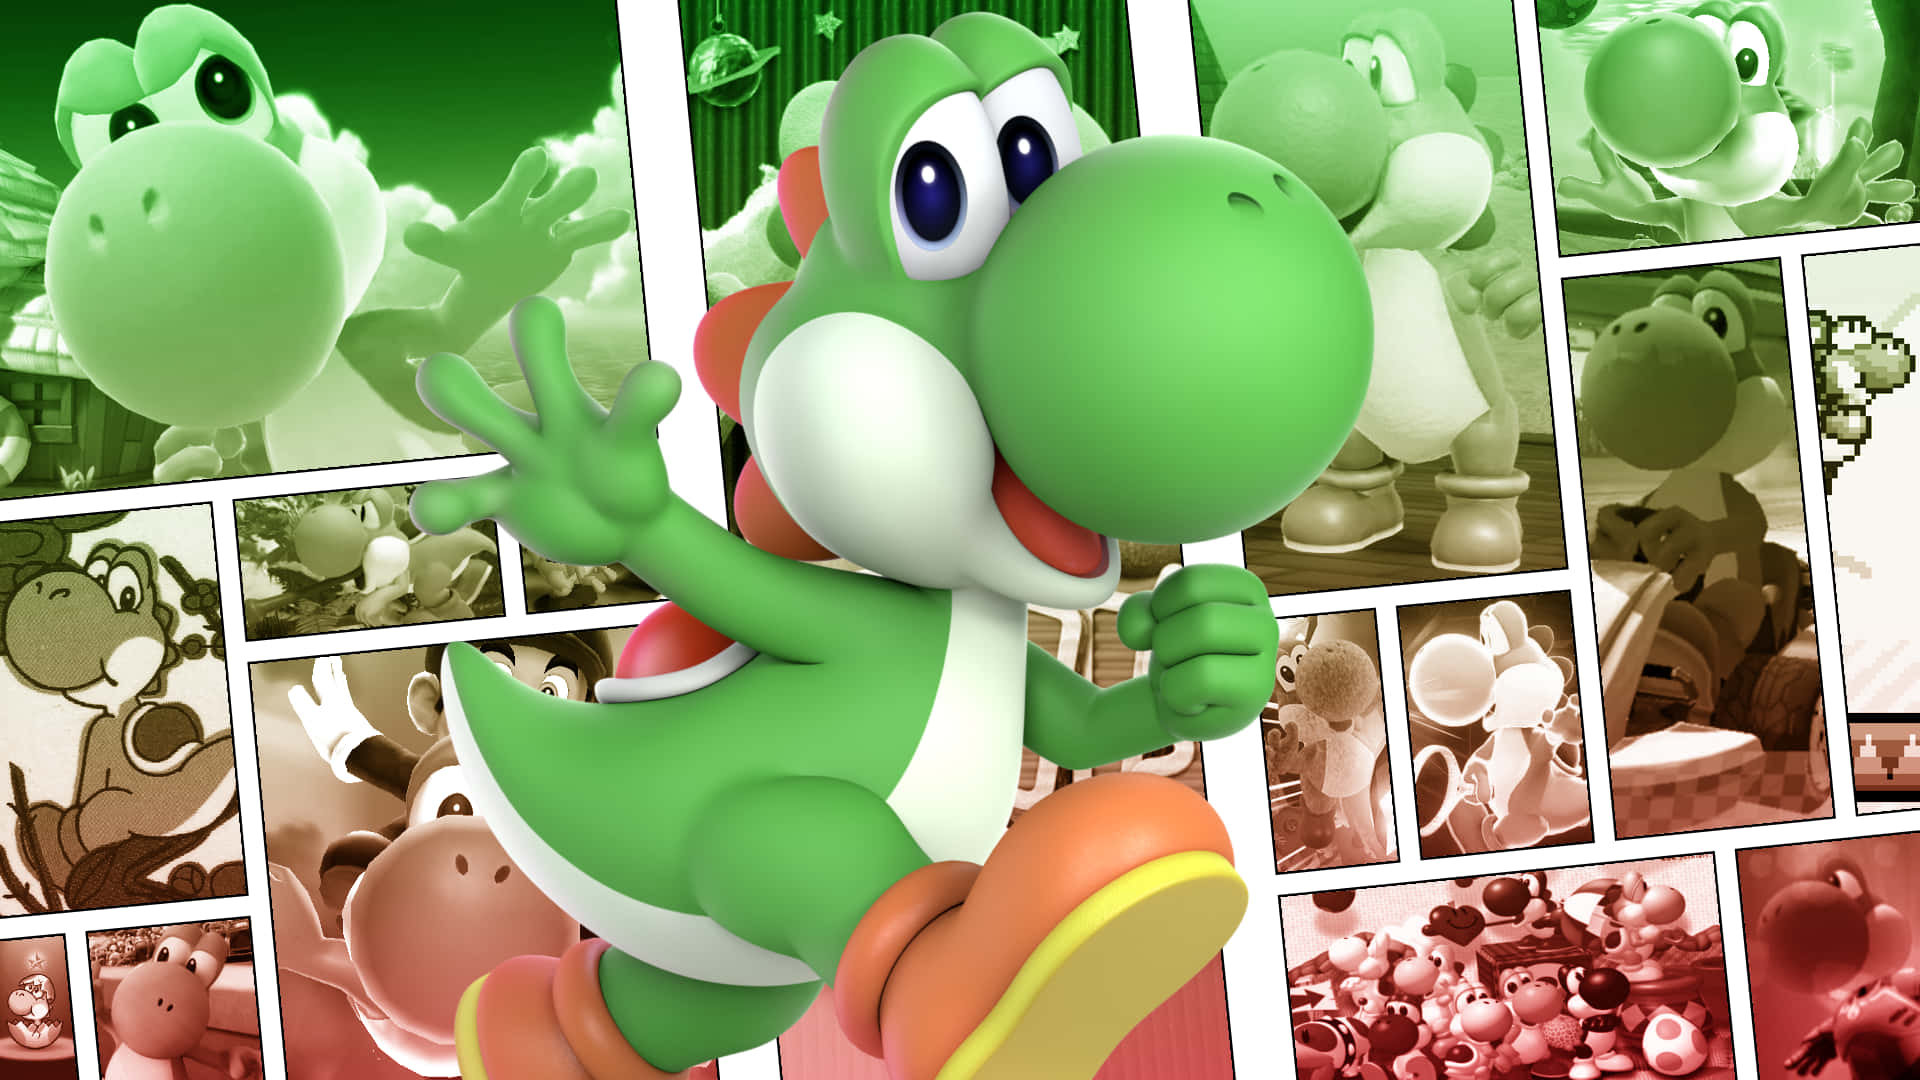 Download Yoshi wallpapers for mobile phone free Yoshi HD pictures